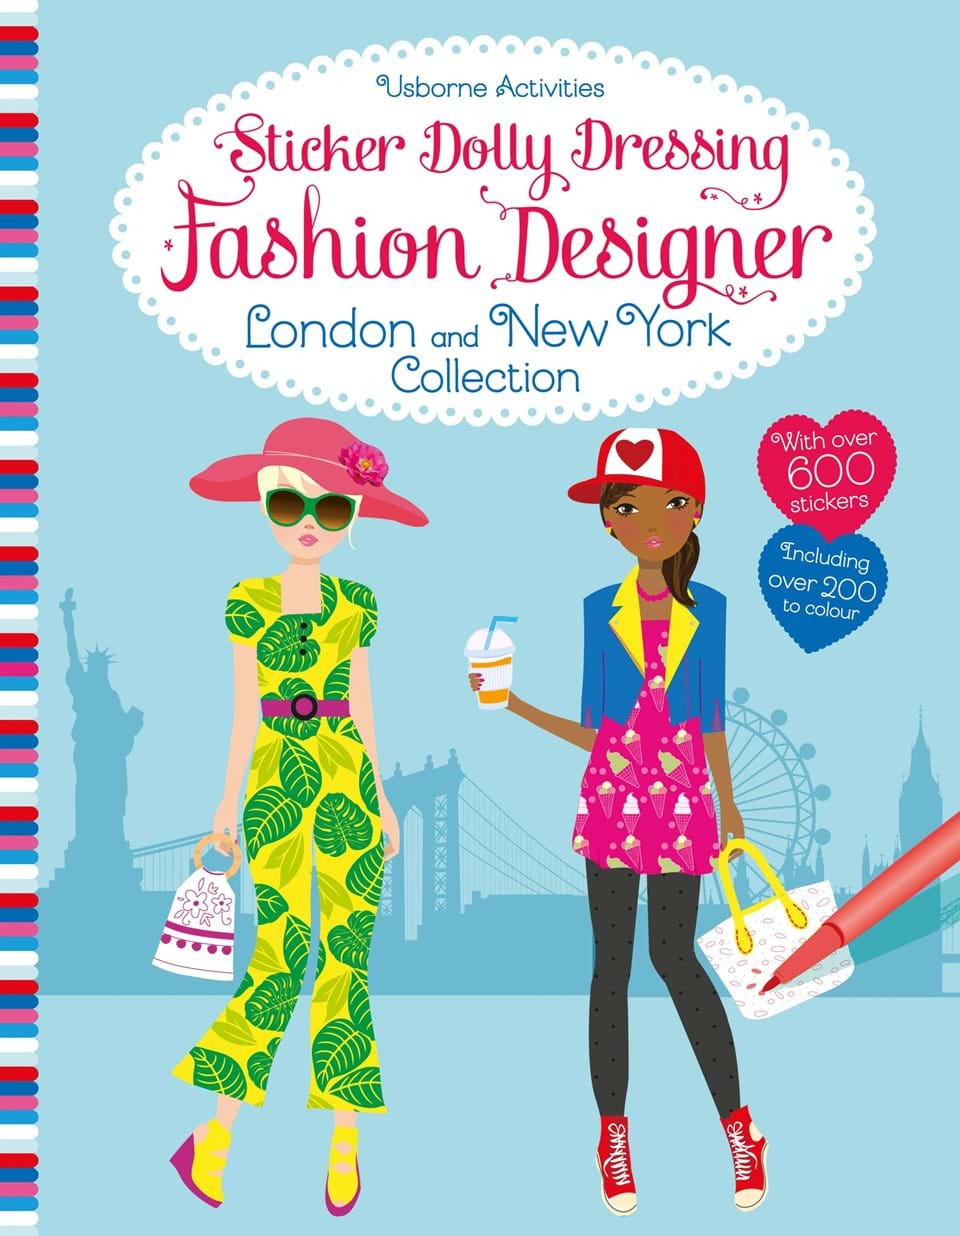 Fashion Design Book For Kids
 “Fashion designer London and New York collection” at